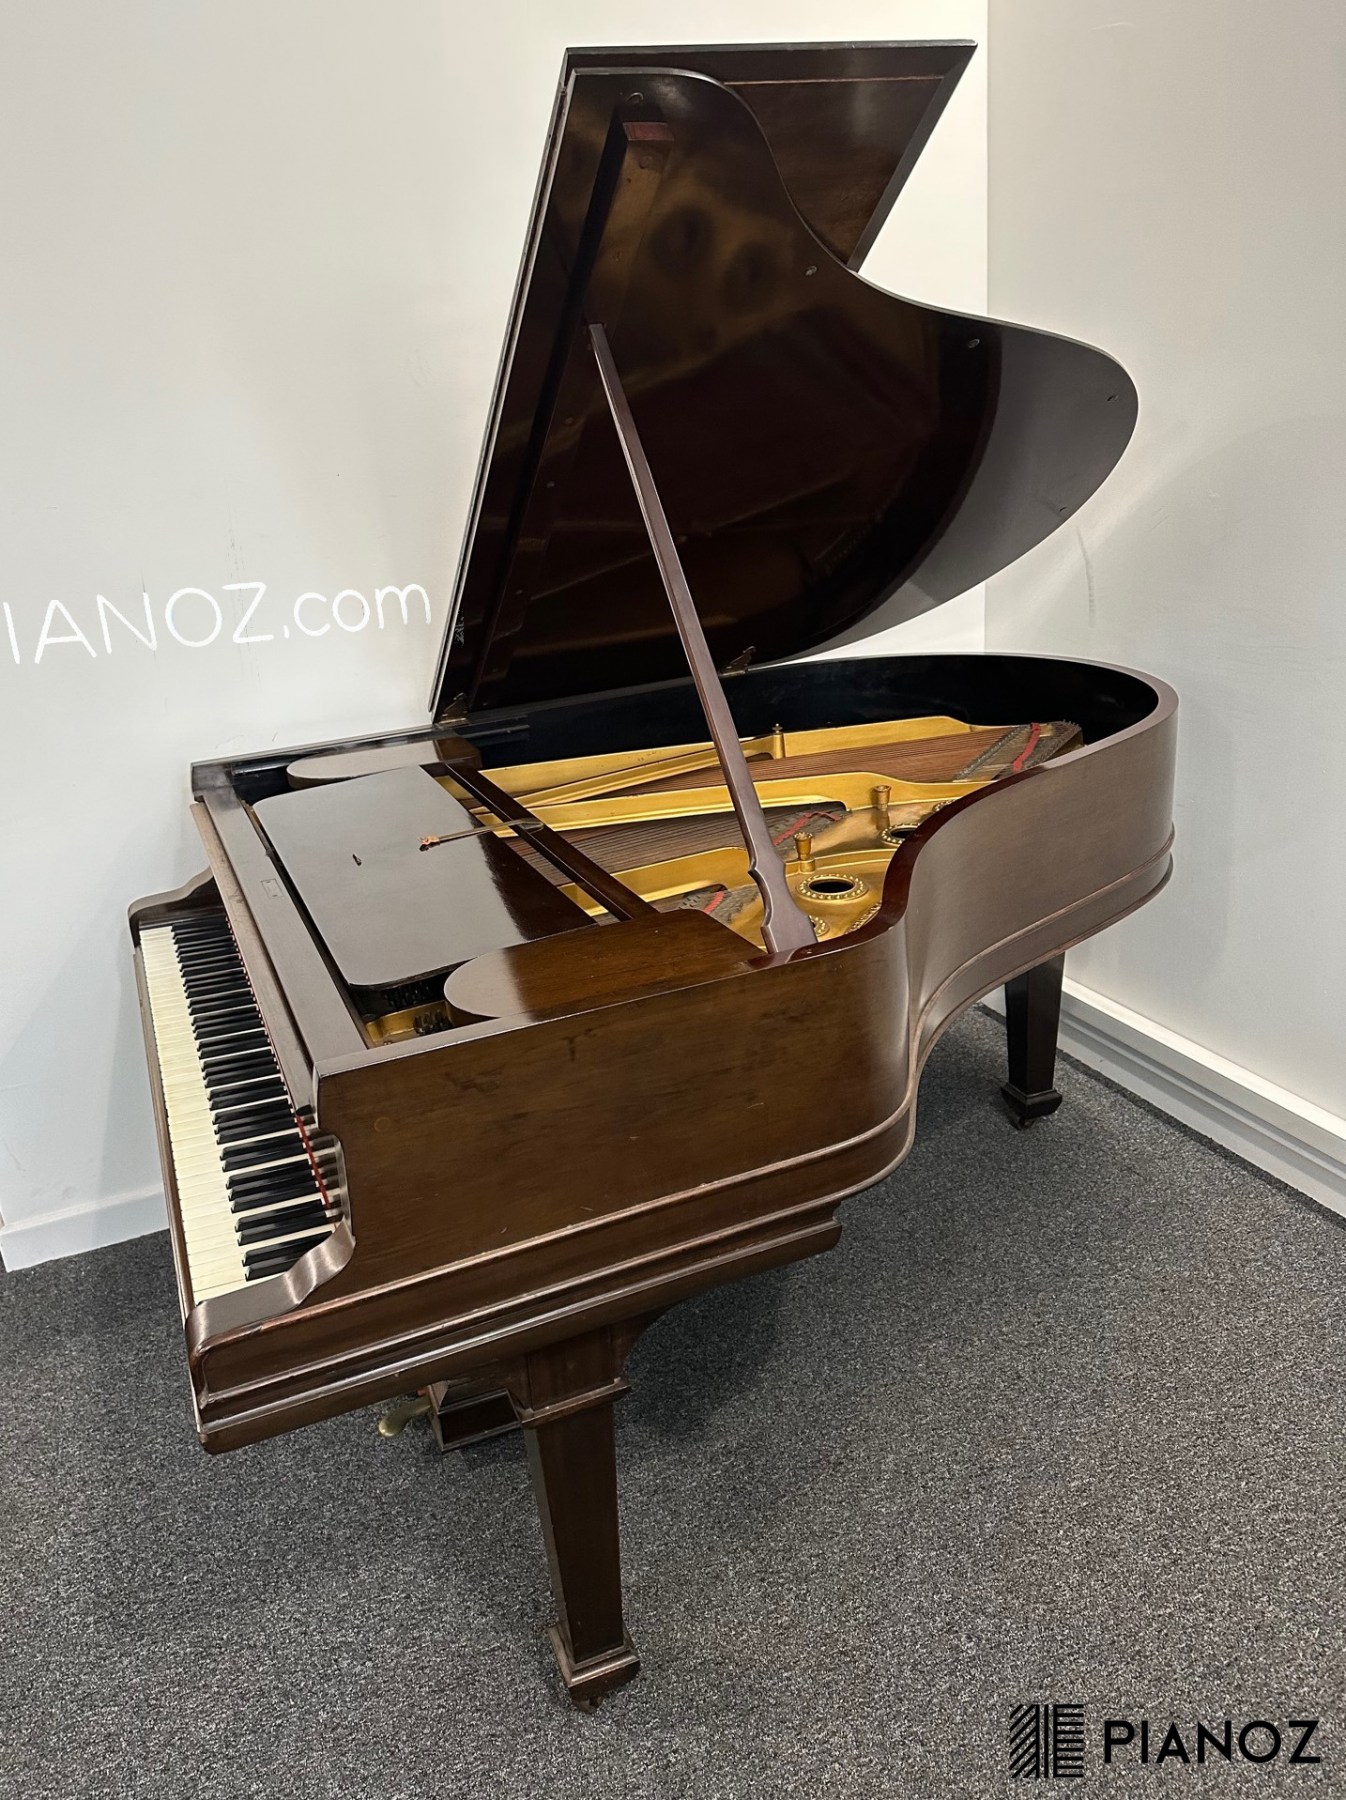 Steinway & Sons Model A Grand Piano piano for sale in UK